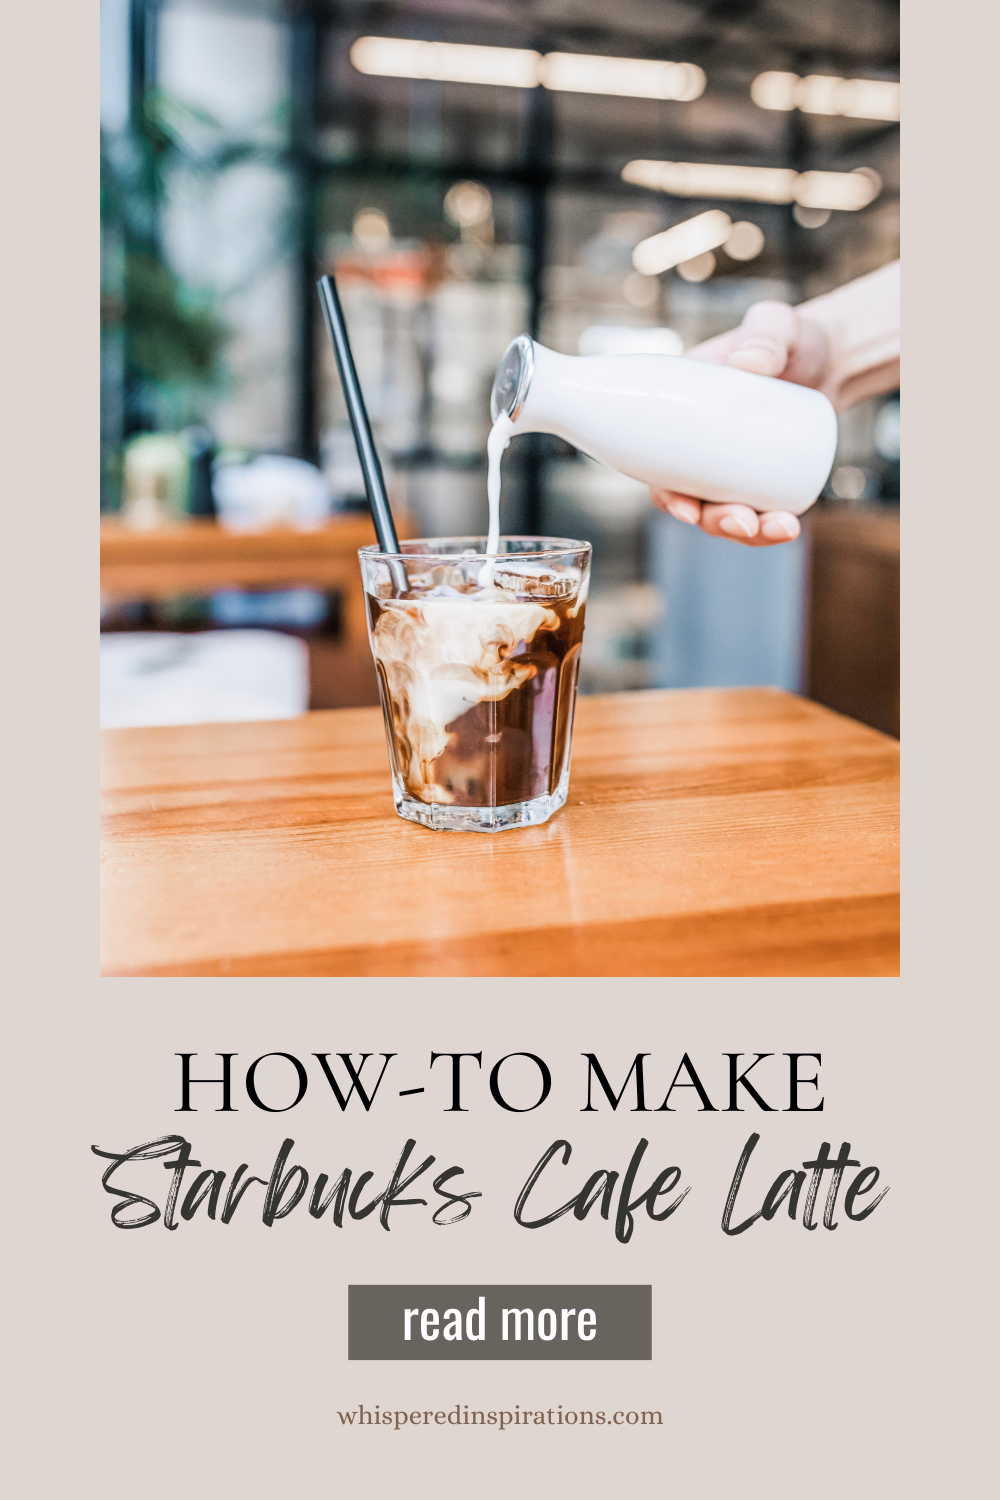 Making an iced latte by pouring cream into a cup of espresso. This article covers how to make Starbucks Caffe Latte.